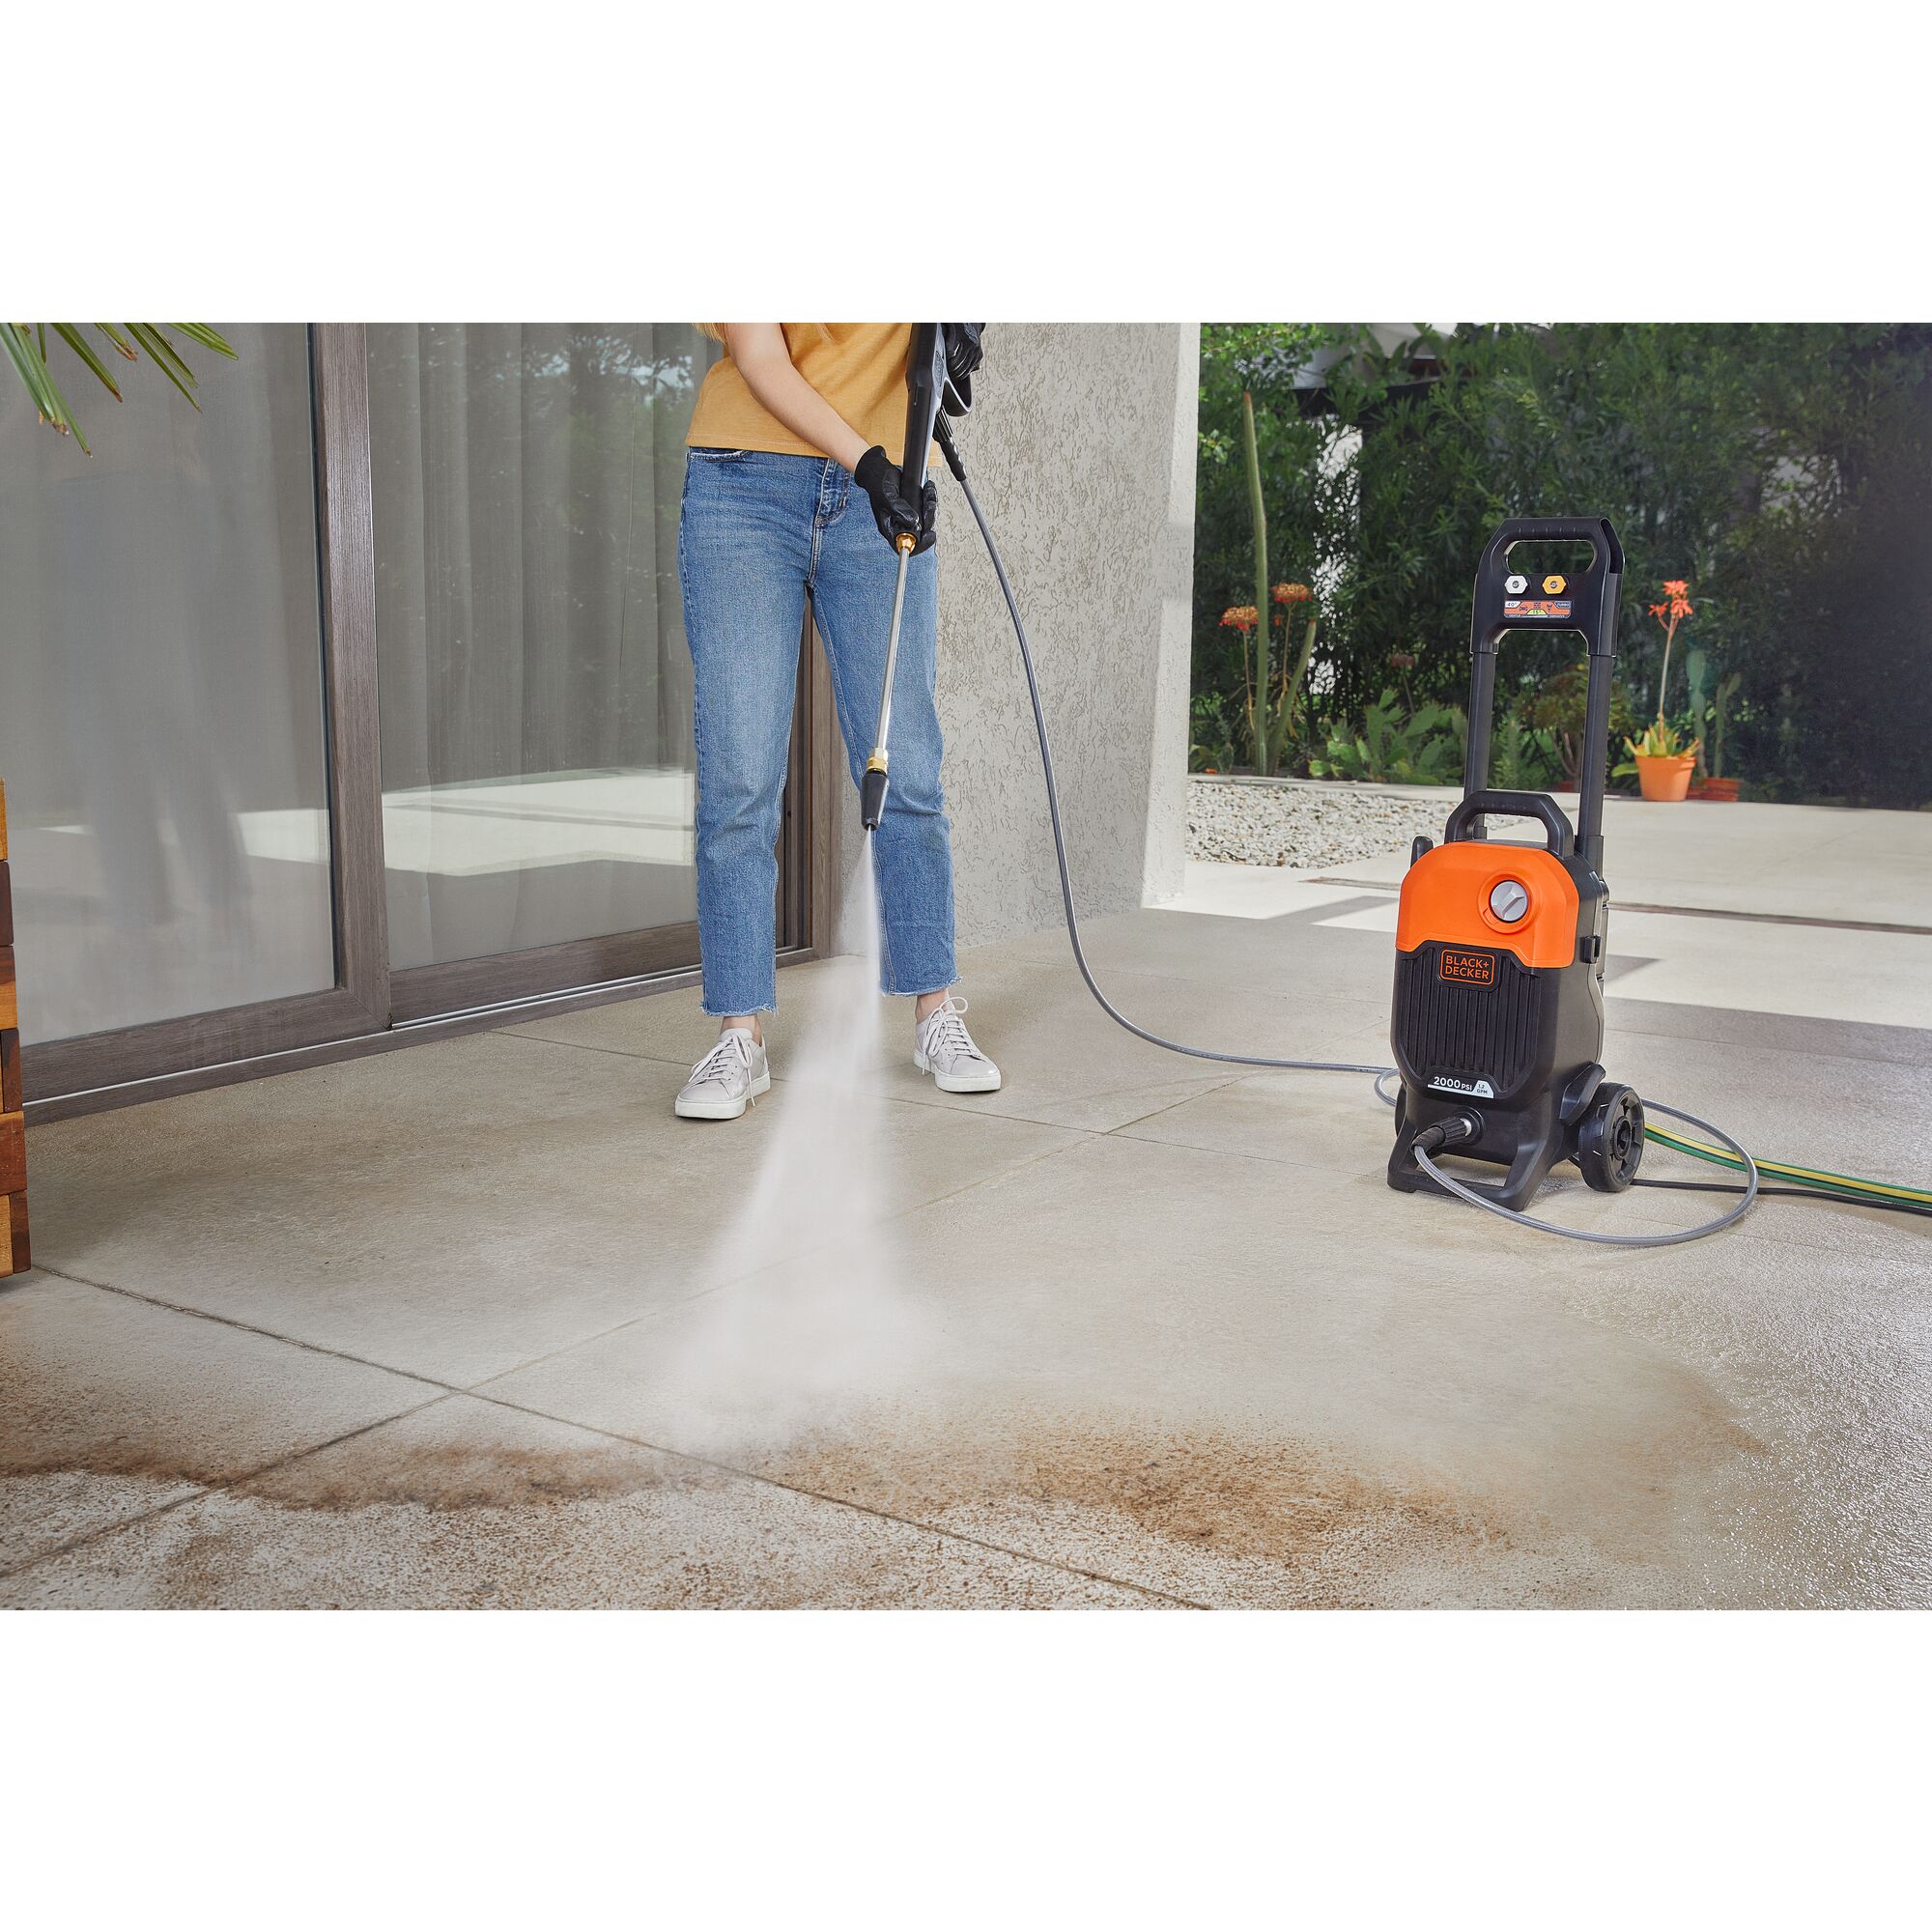 Person using BLACK+DECKER 2,000 MAX psi* pressure washer to clean tile floor